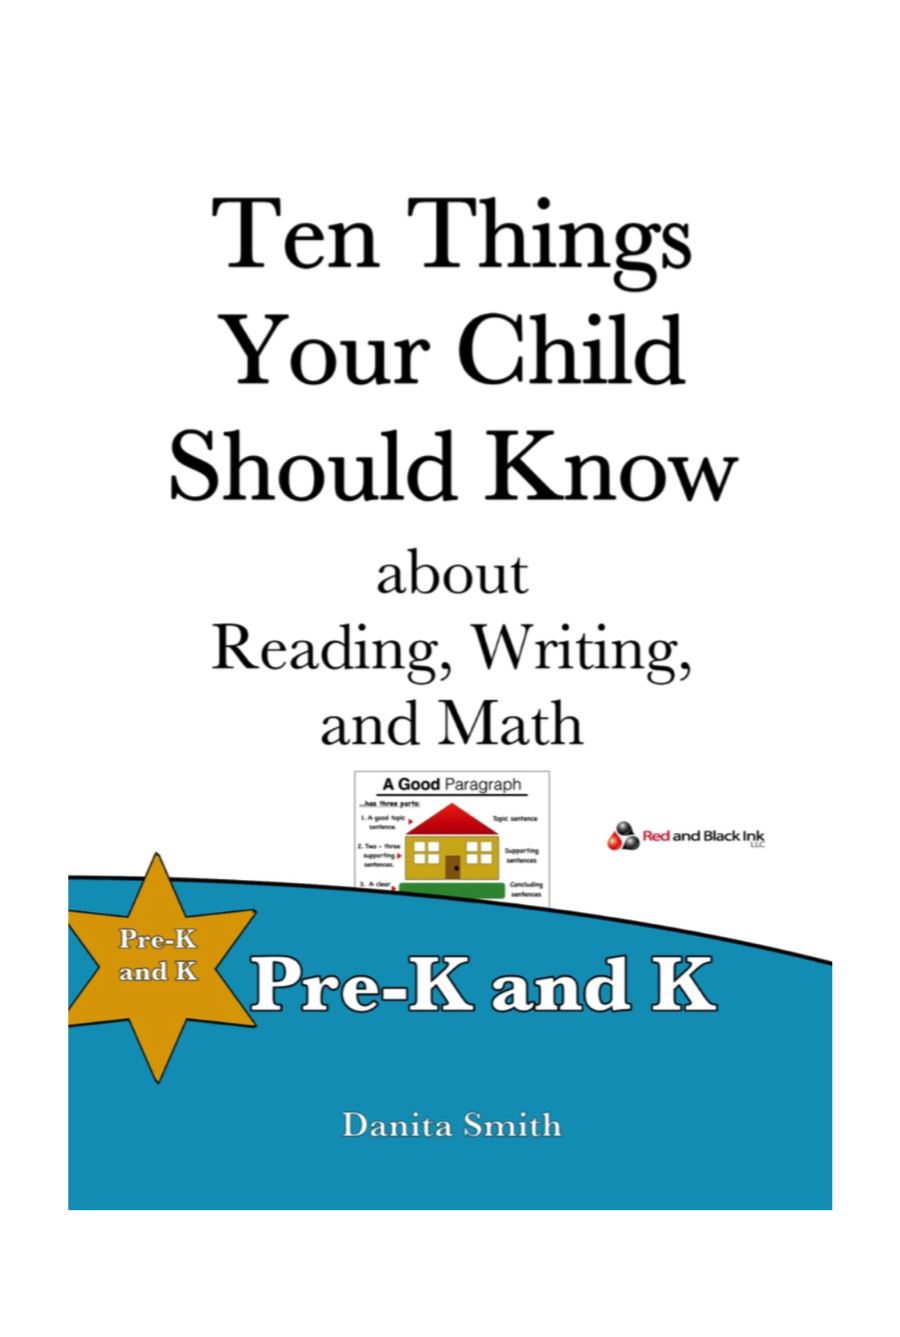 Final - Ten Things Your Child Should Know PreK and K.png